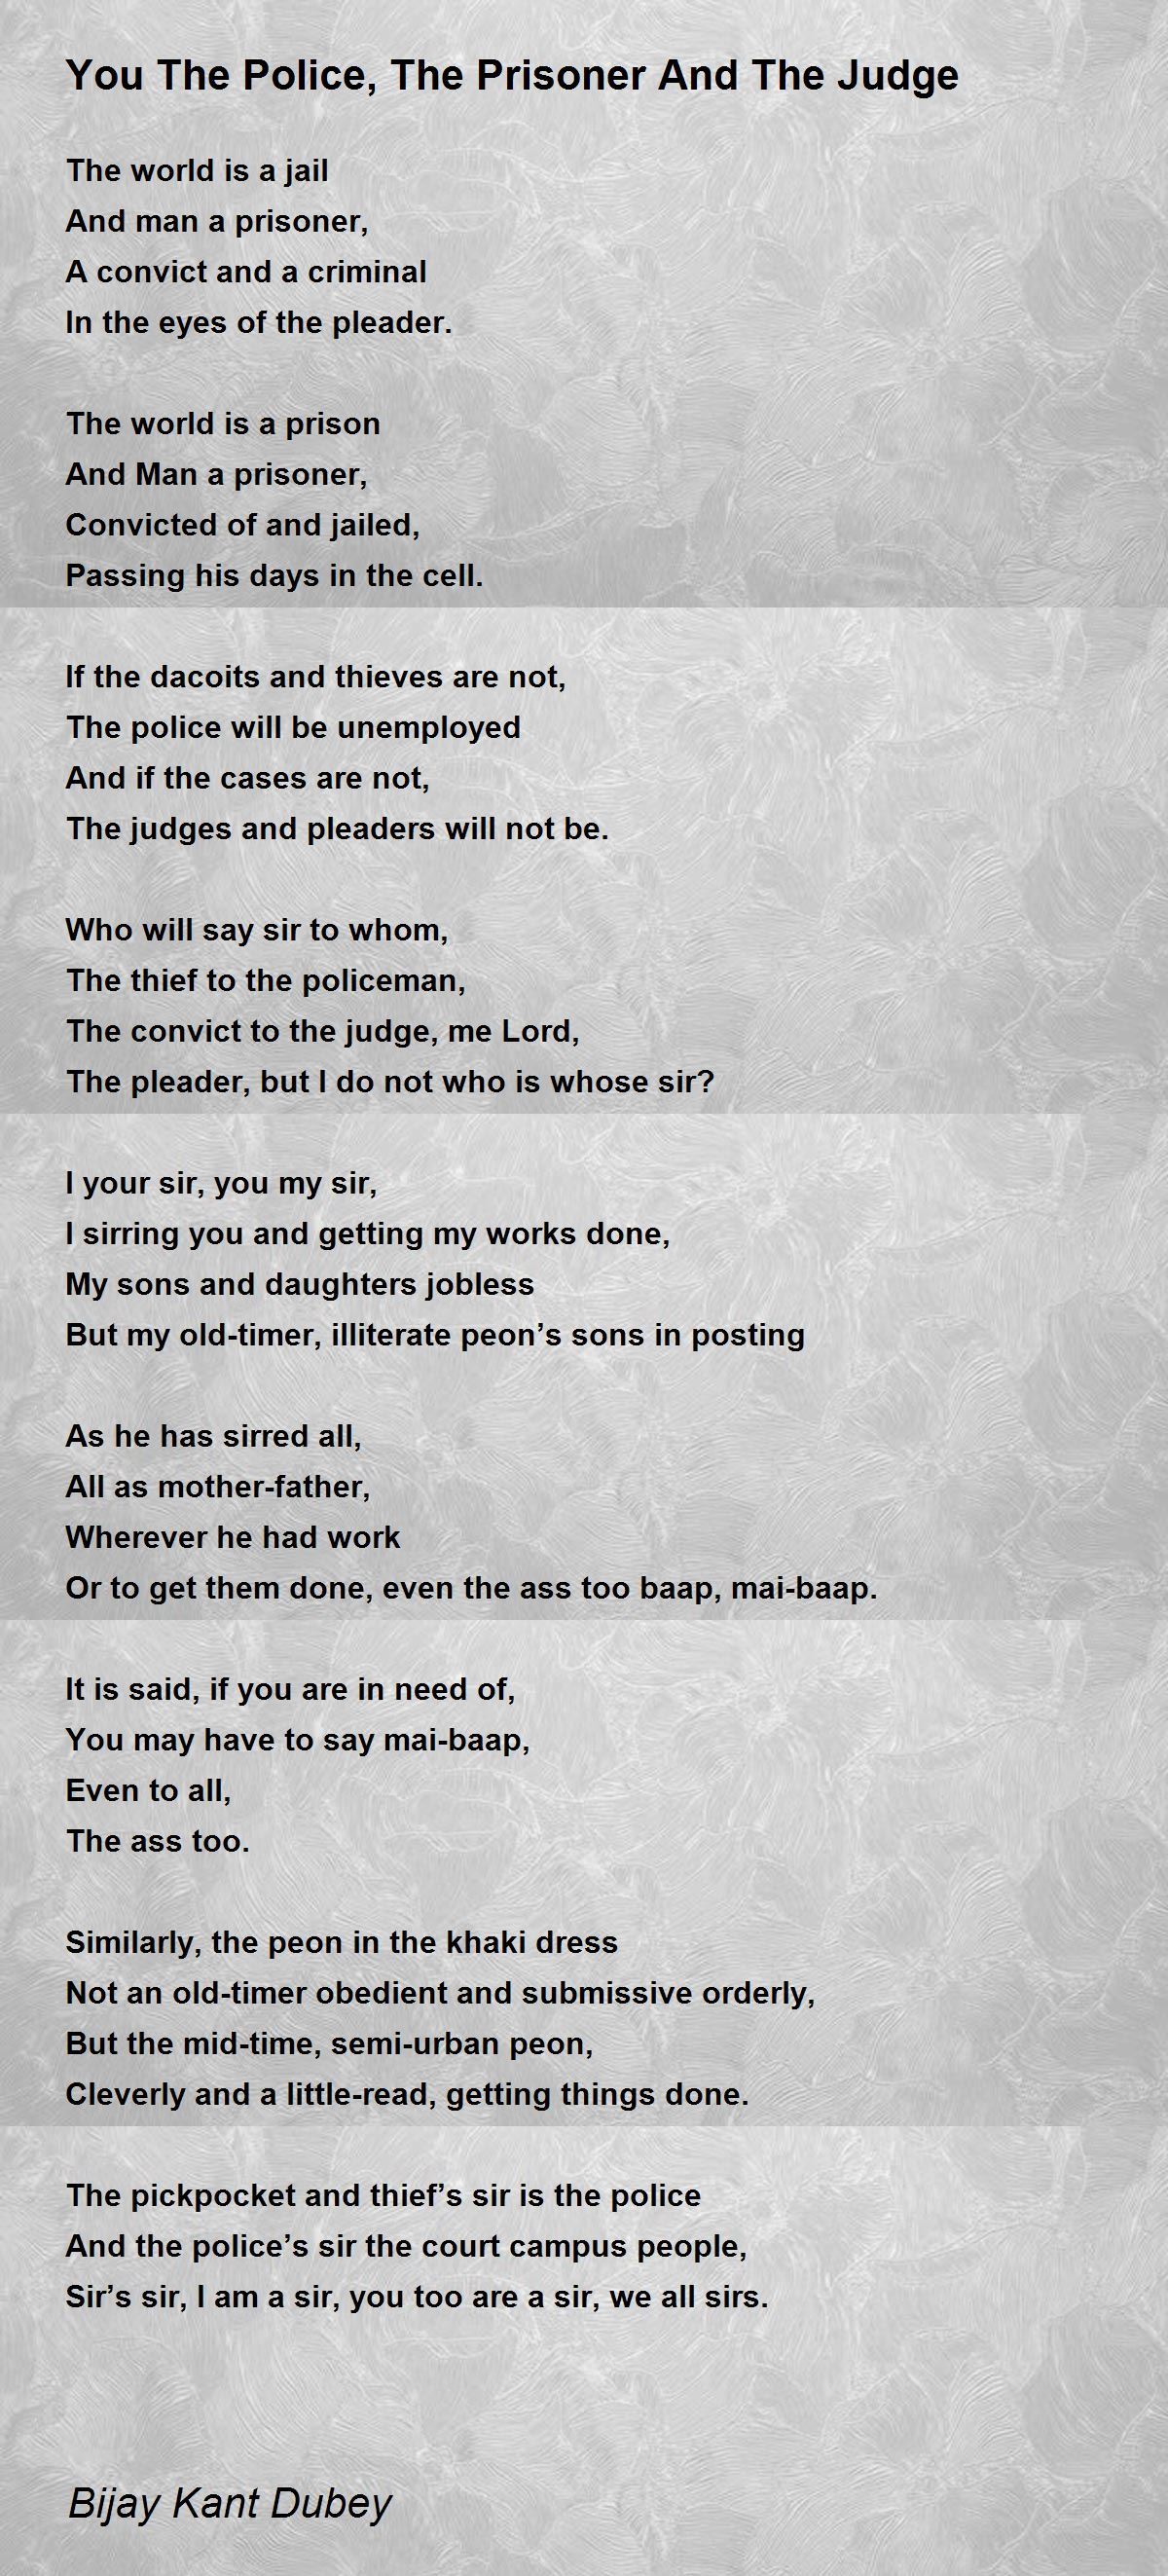 You The Police, The Prisoner And The Judge Poem by Bijay Kant Dubey